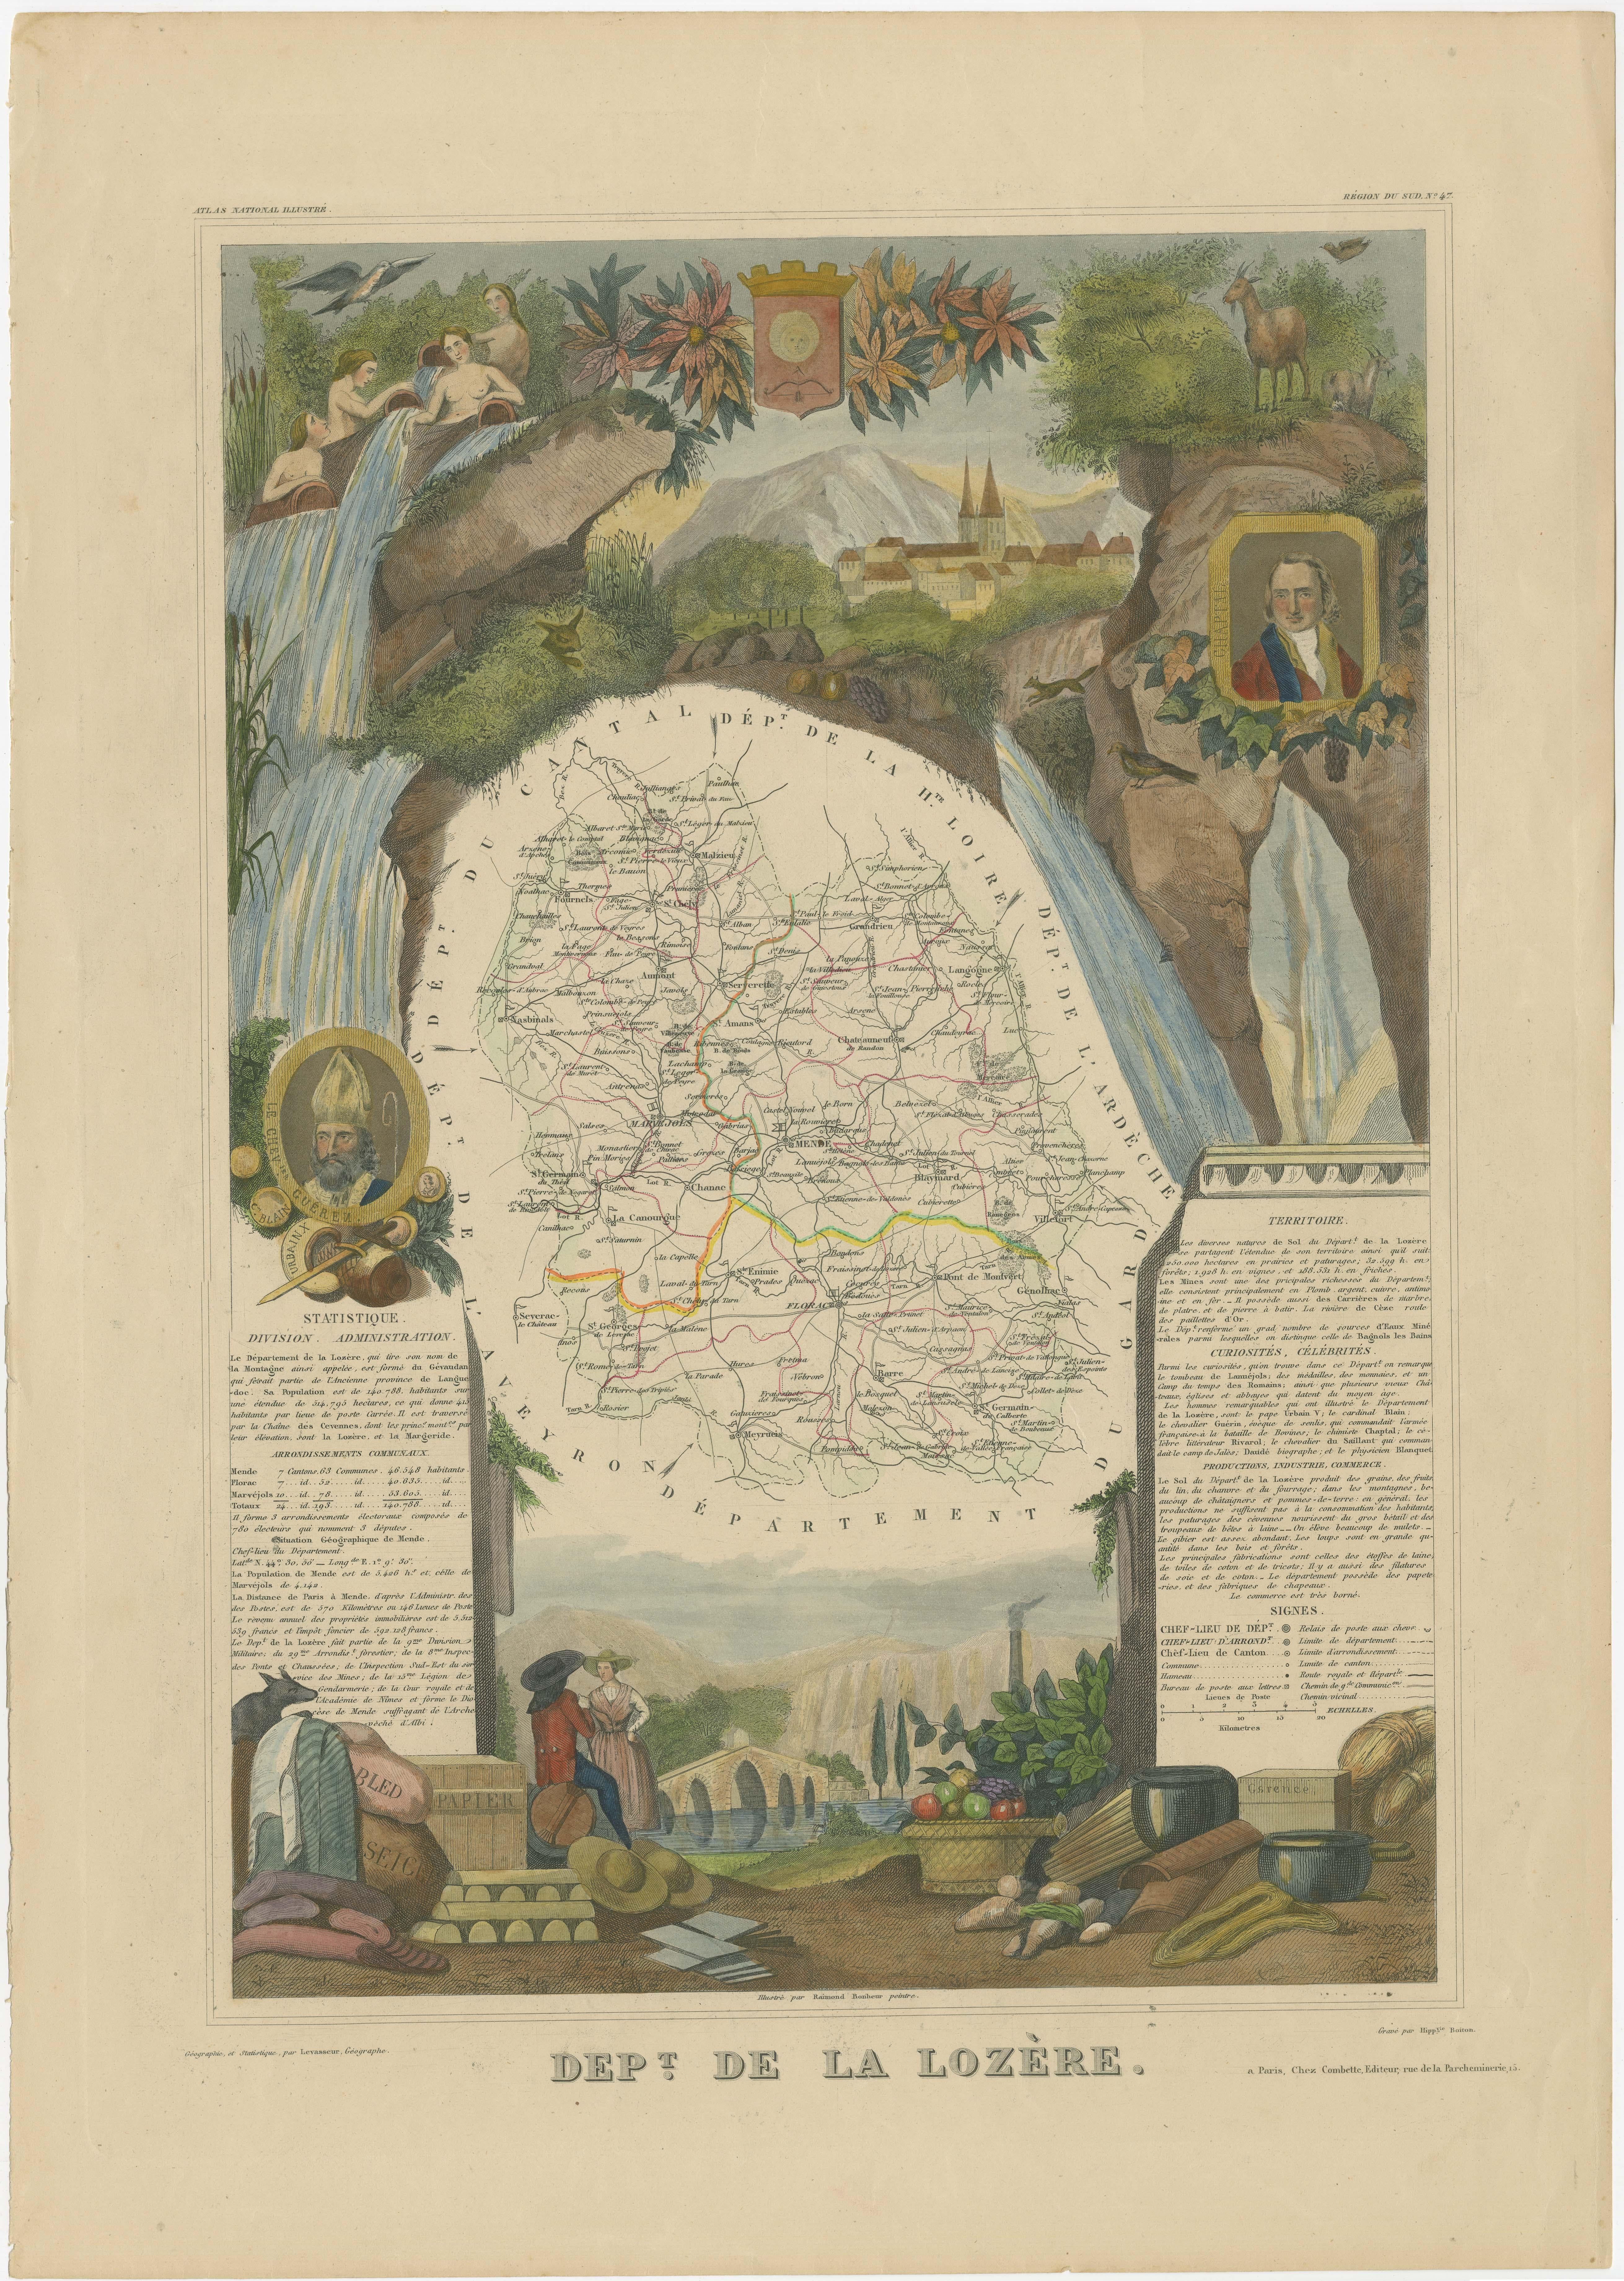 Antique map titled 'Dept. de la Lozère'. Map of the French department of Lozere, France. This remote mountainous part of Languedoc is rural, sparcely populated, and extremely beautiful. This area of France is famous for its cheese production. Their